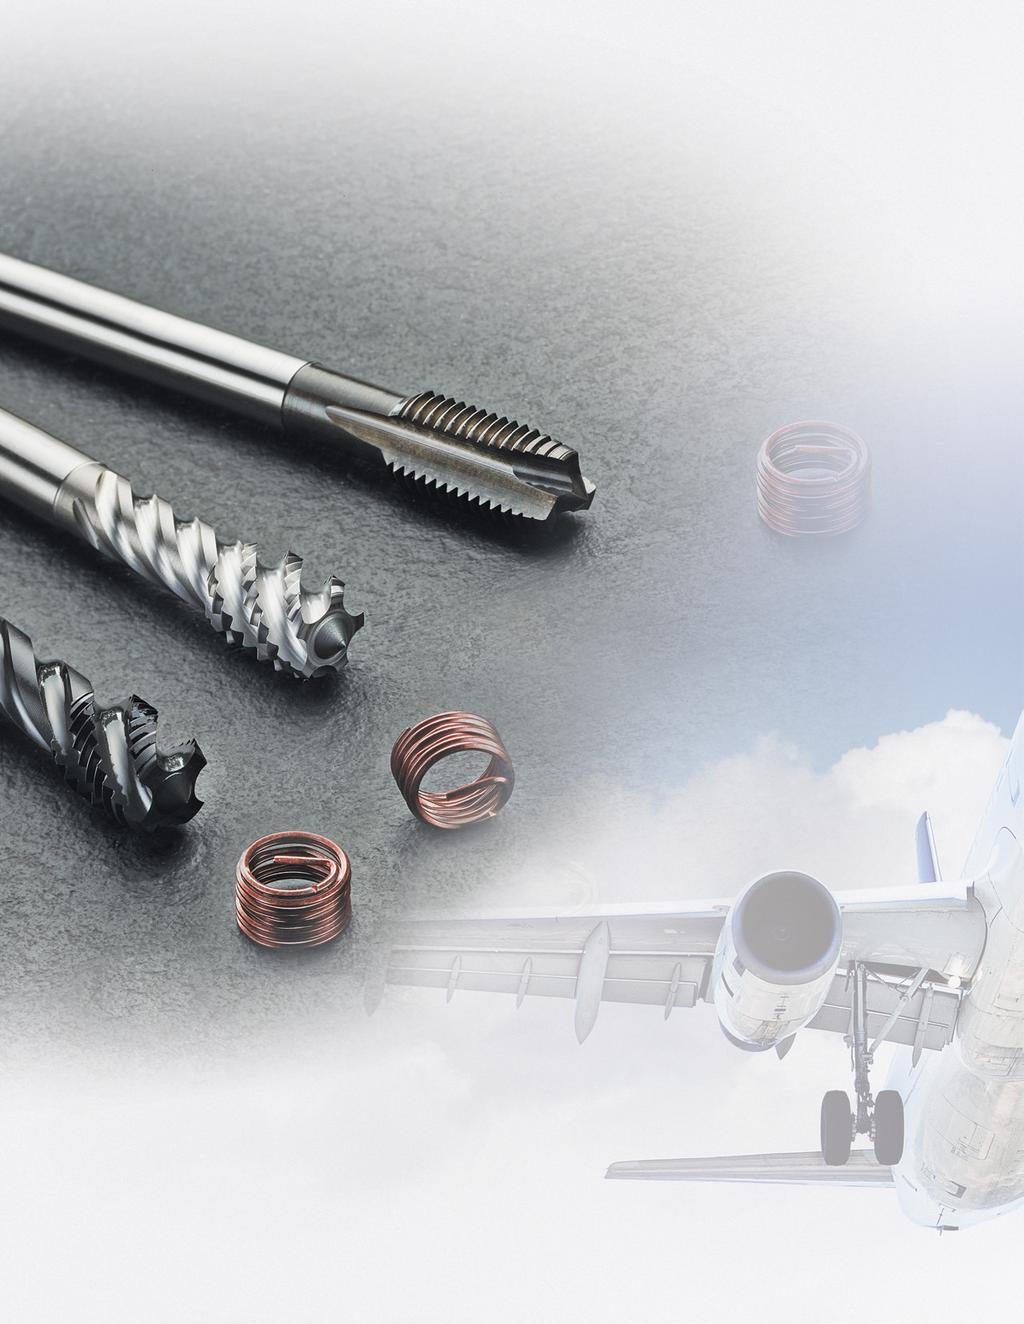 SCREW THREAD INSERT TECHNOLOGY PREVENT STRIPPING on Safety Critical Threading Applications with.